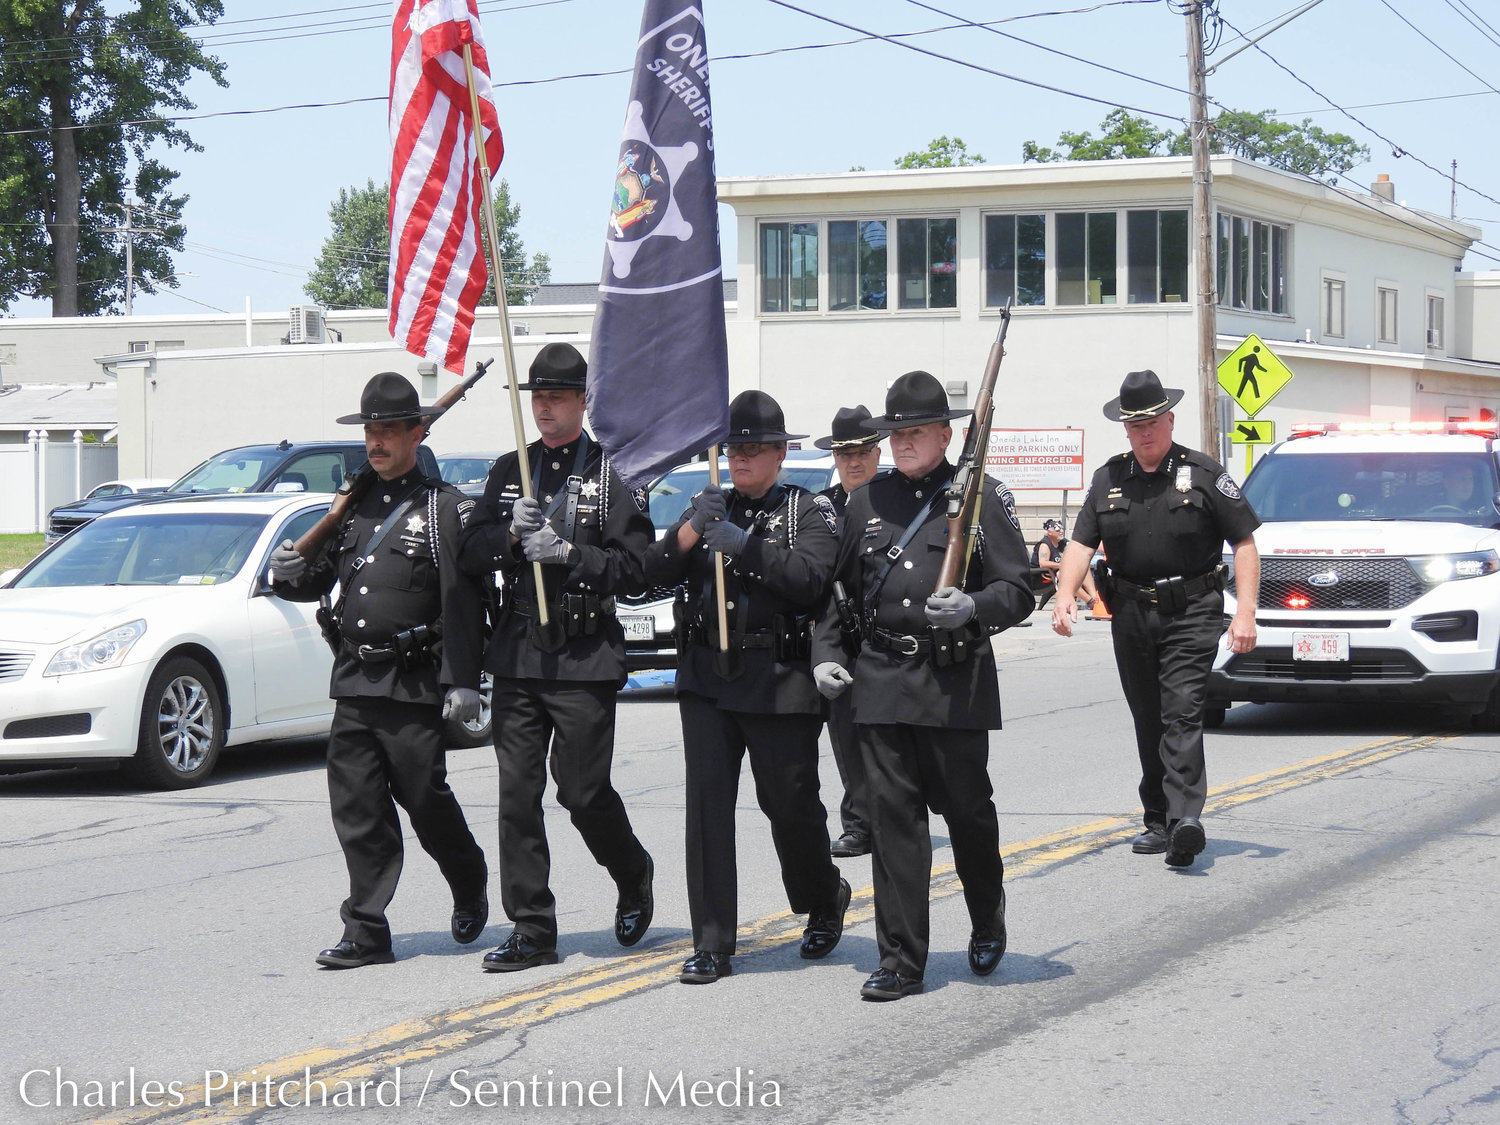 The Sylvan Beach Pirate's Parade makes its way down Main Street. Pictured is the Oneida County Sheriff's Office Color Guard with Oneida County Sheriff Robert Maciol right behind them.